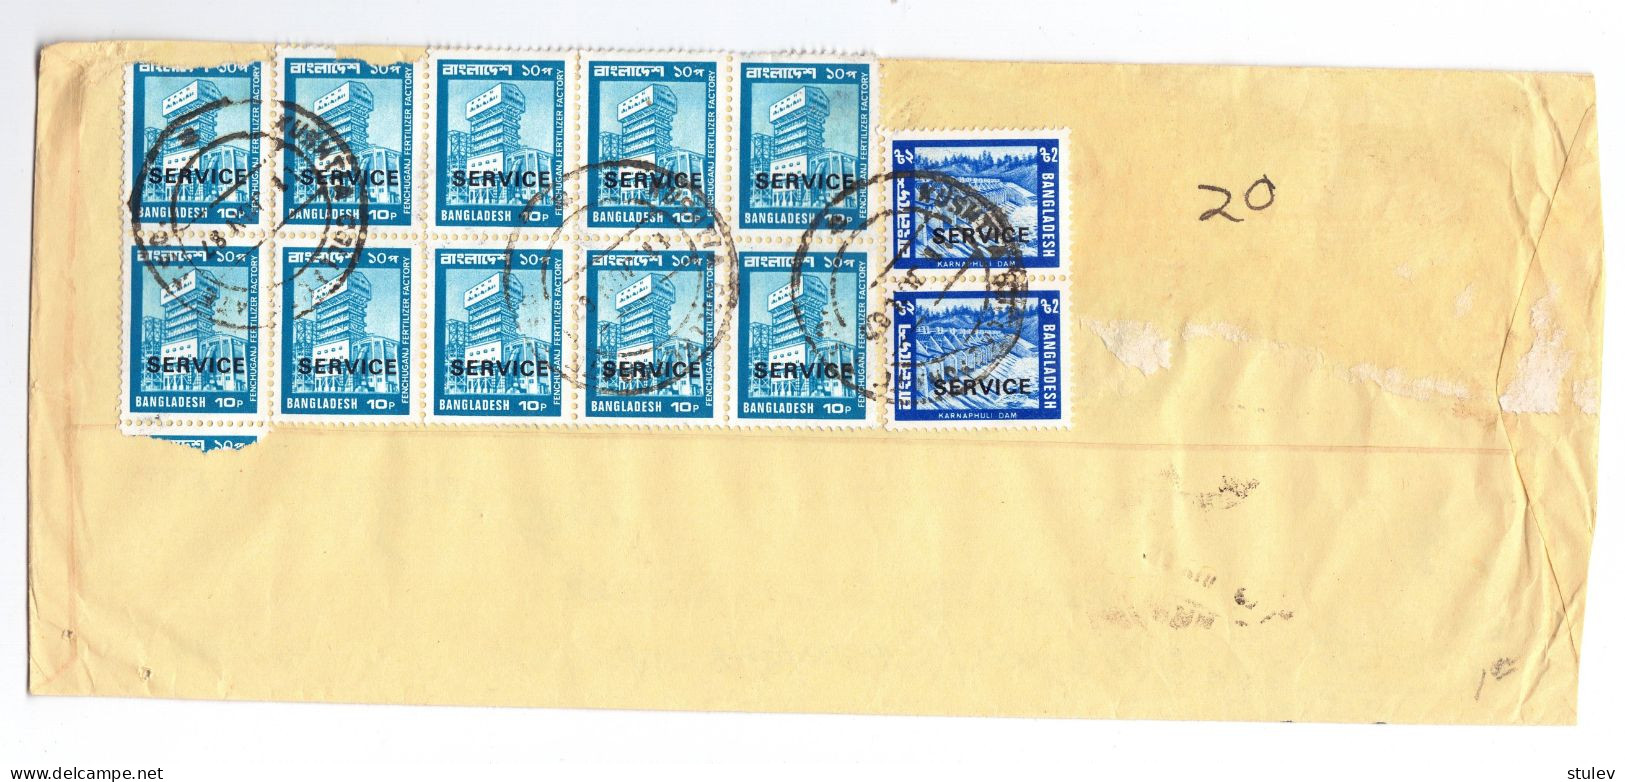 Bangladesh 1987 Official Cover With Block Of 10 1979-82 10p SERVICE Stamps - Bangladesh